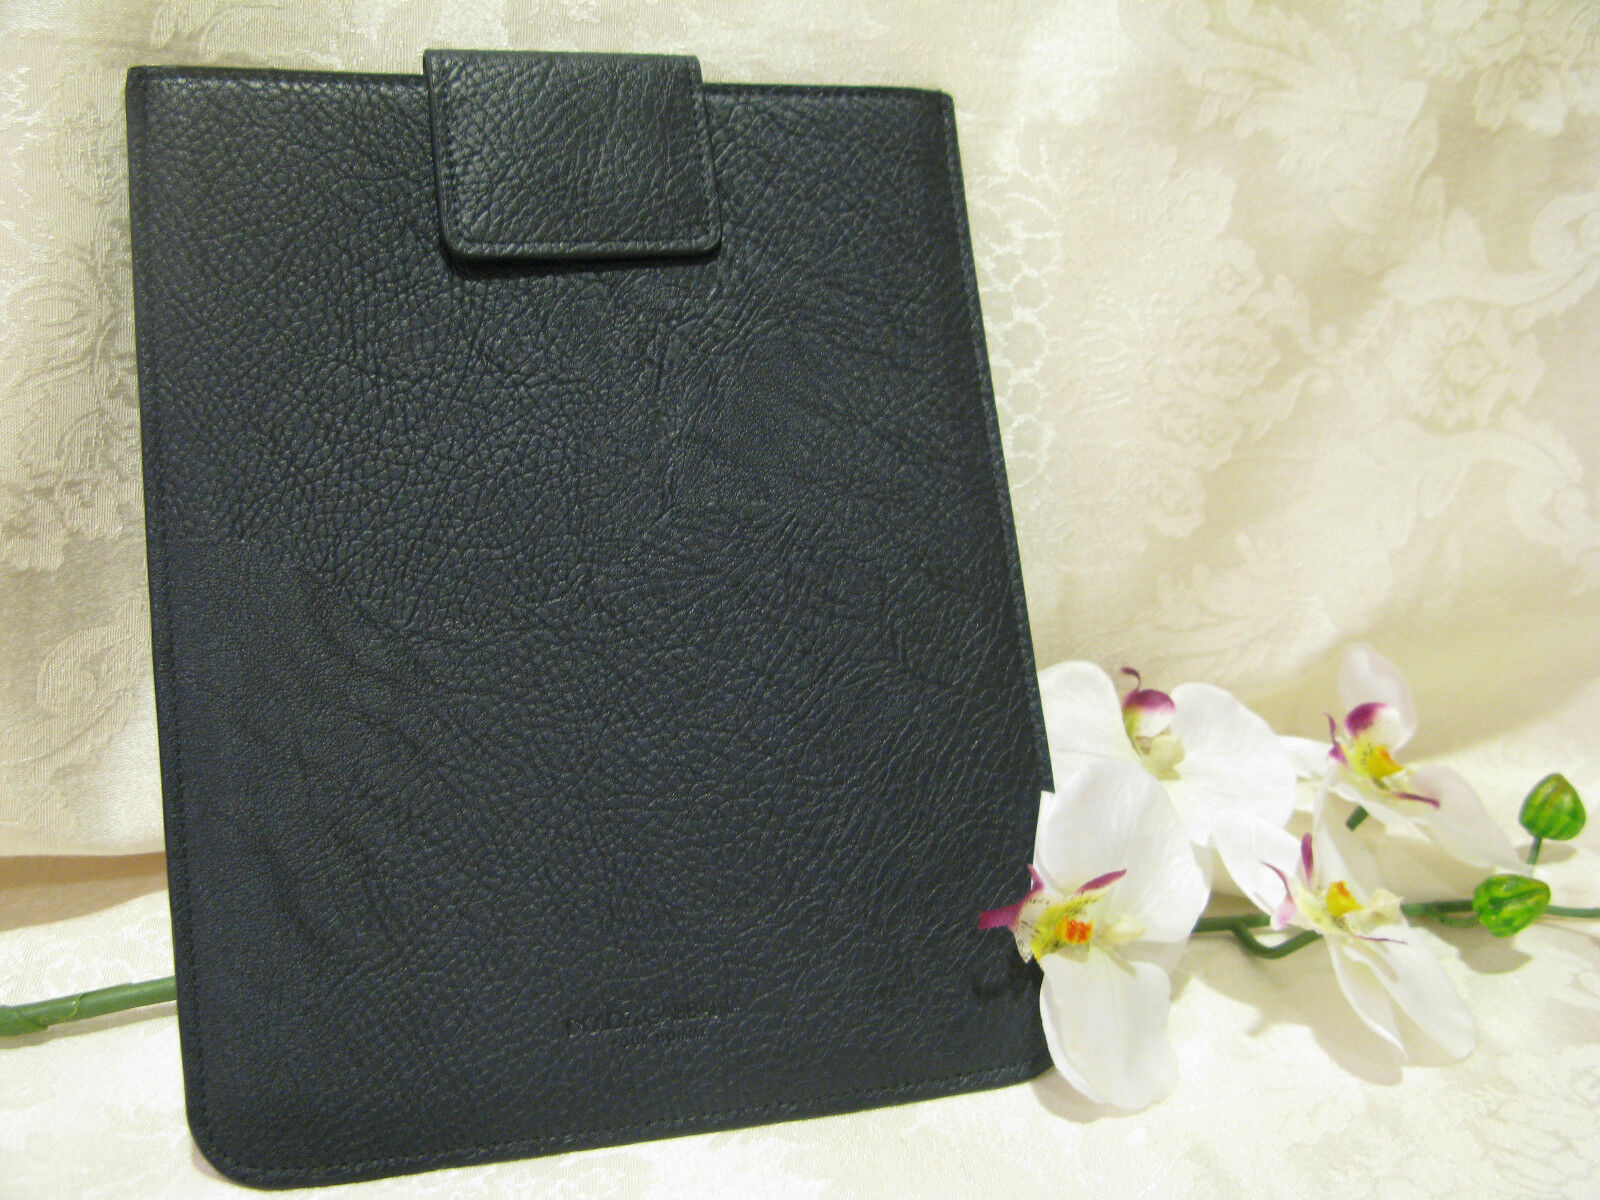 Dolce & Gabbana Black iPad Cover/Pouch.  Brand New.